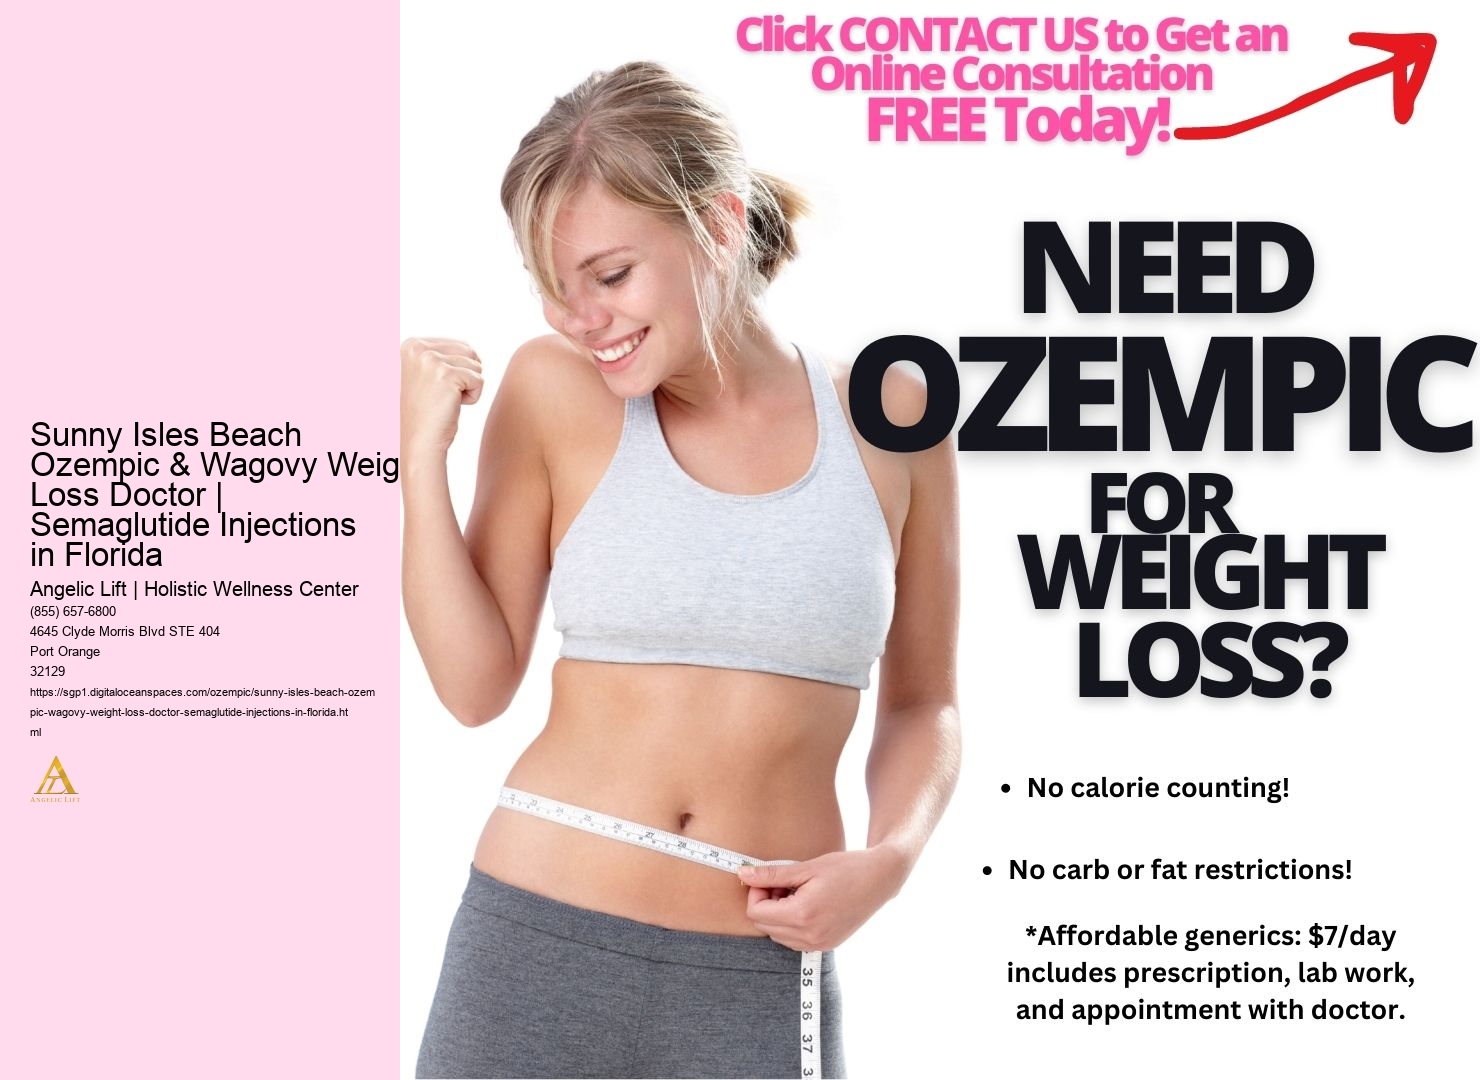 Sunny Isles Beach Ozempic & Wagovy Weight Loss Doctor | Semaglutide Injections in Florida